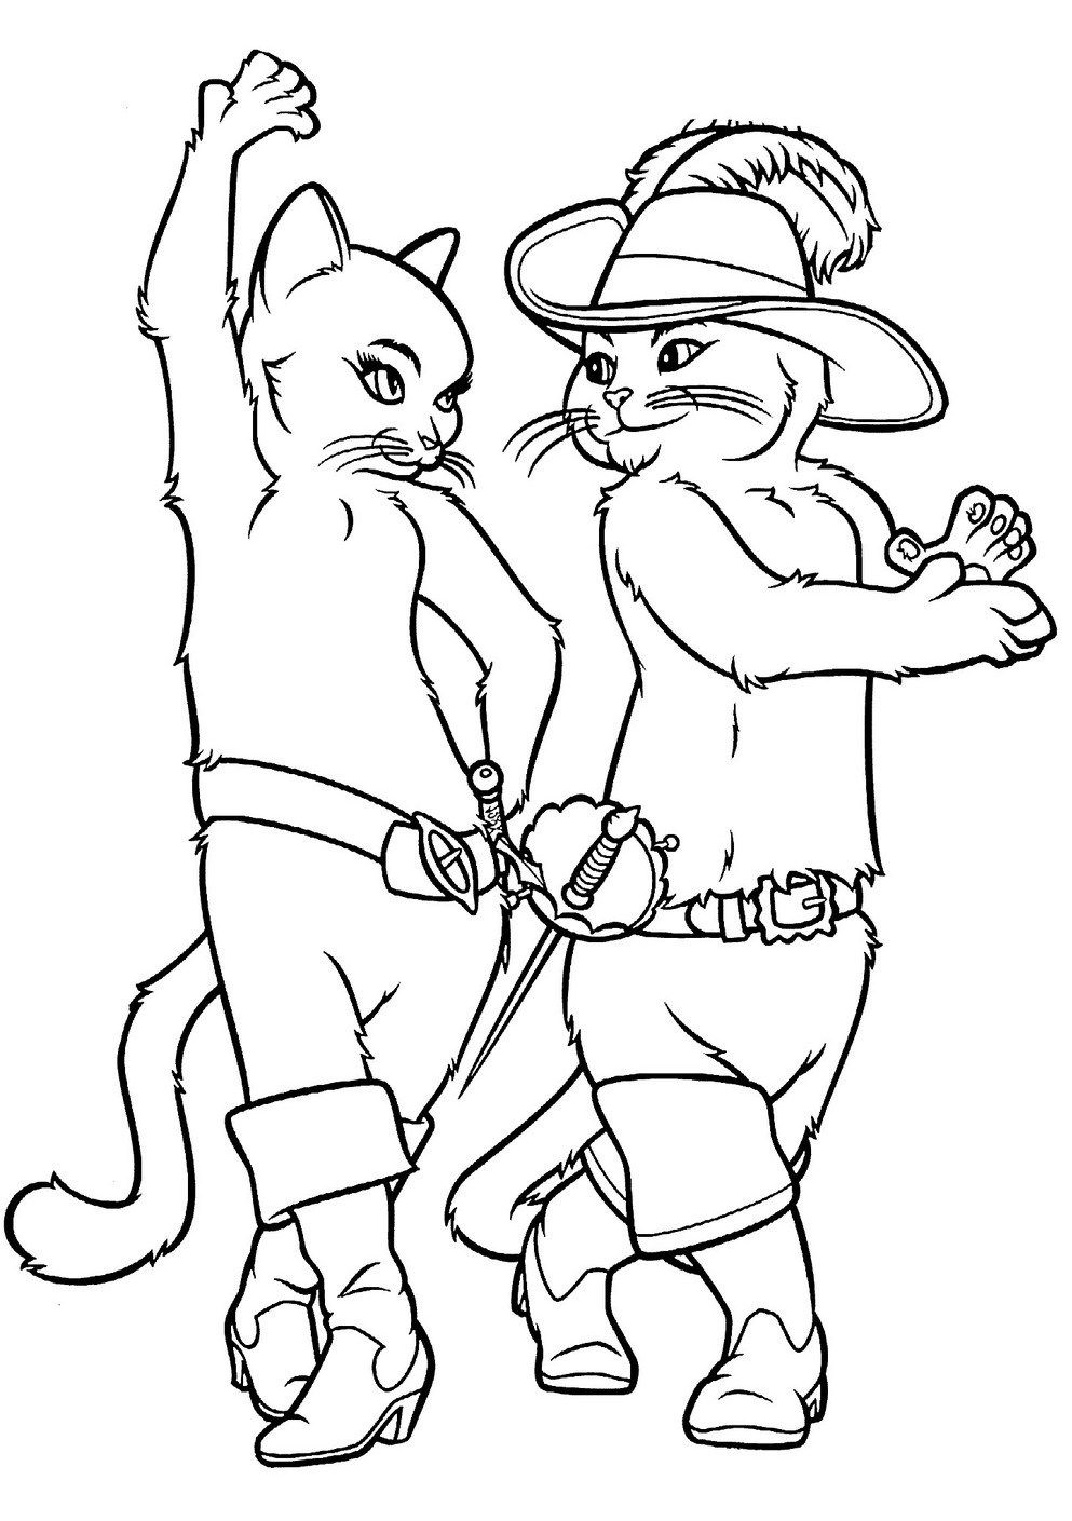 Puss in Boots Dancing The Last Wish Coloring  for kids - SheetalColor.com